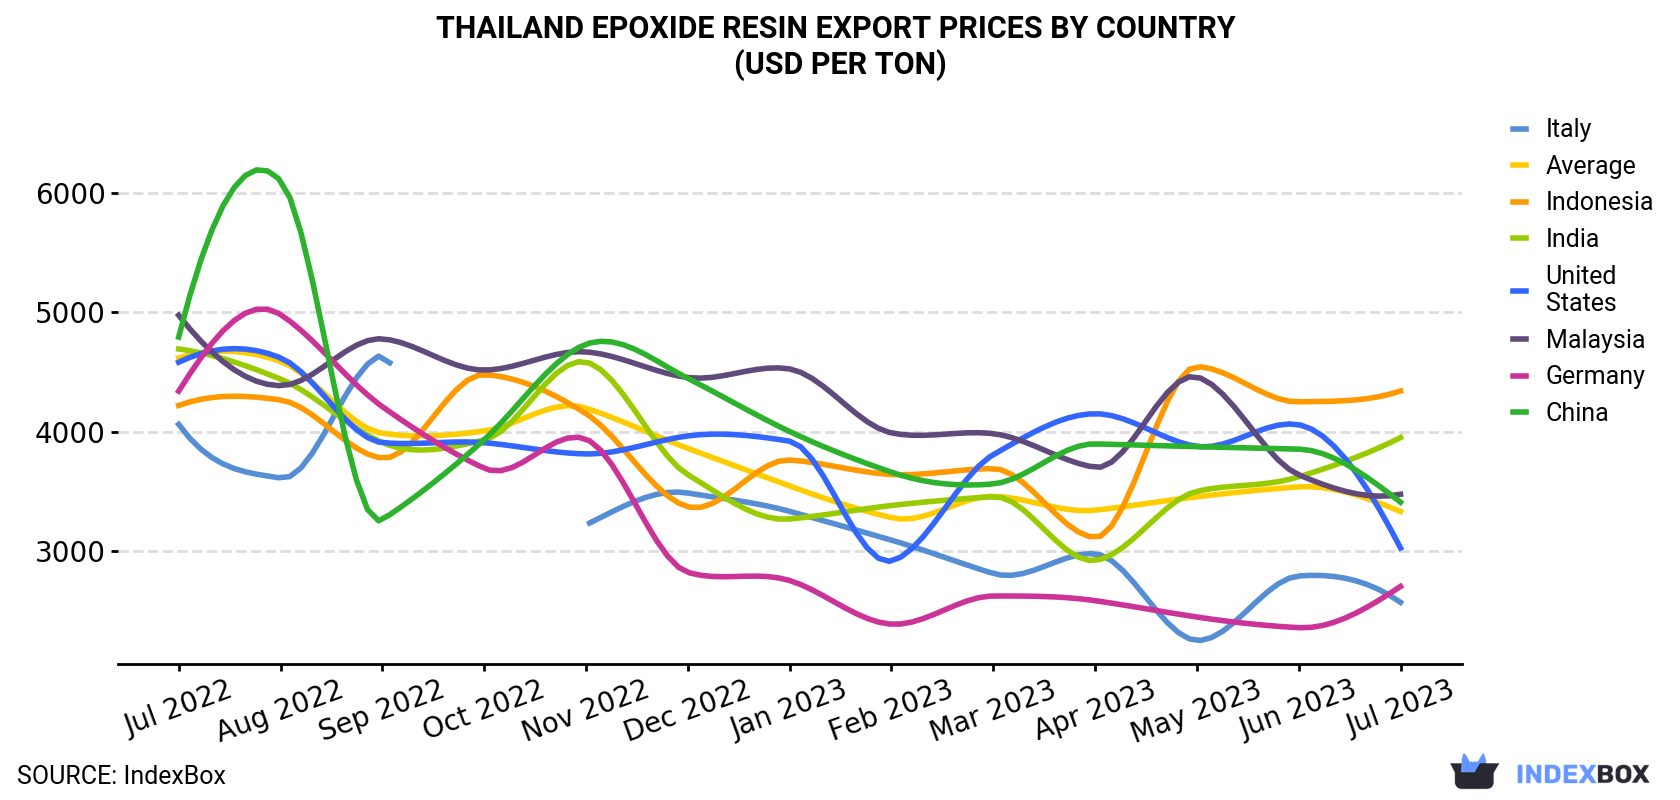 Thailand Epoxide Resin Export Prices By Country (USD Per Ton)